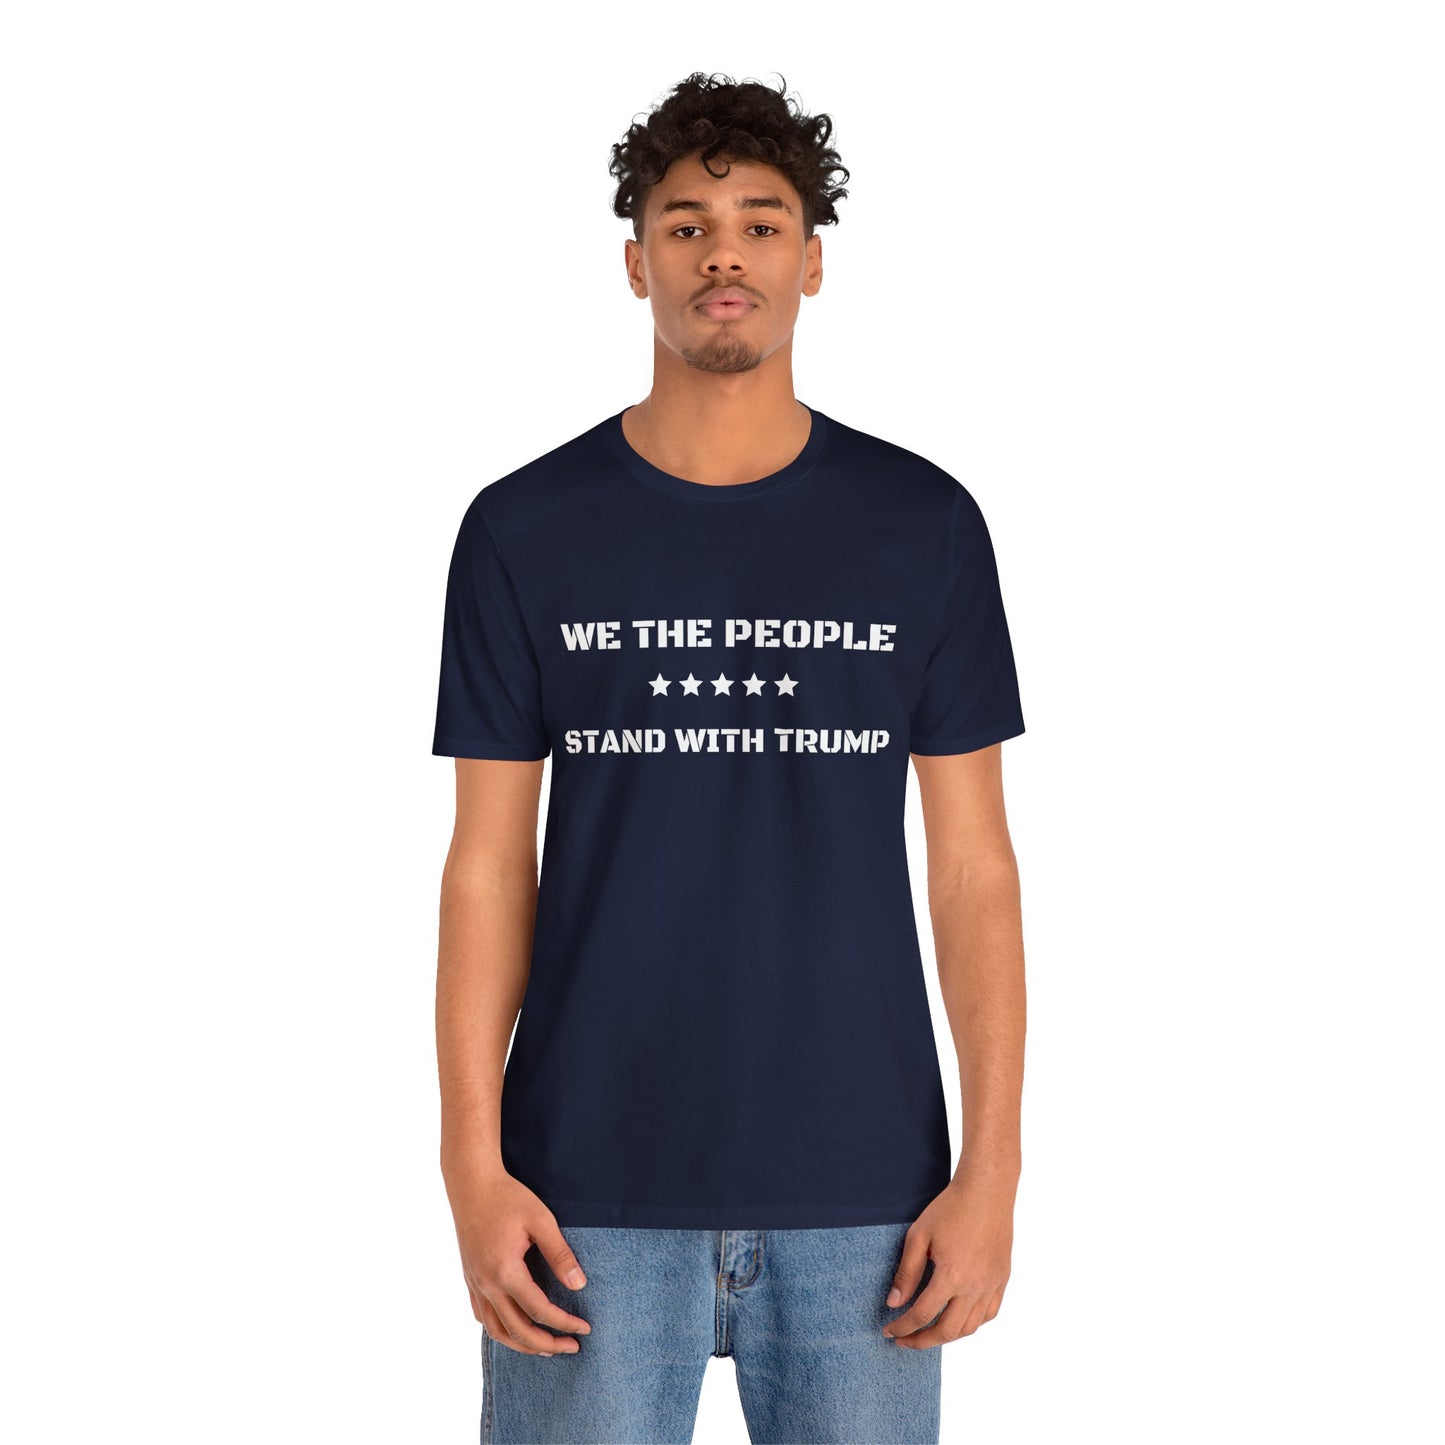 Women's "We the People" T-Shirt